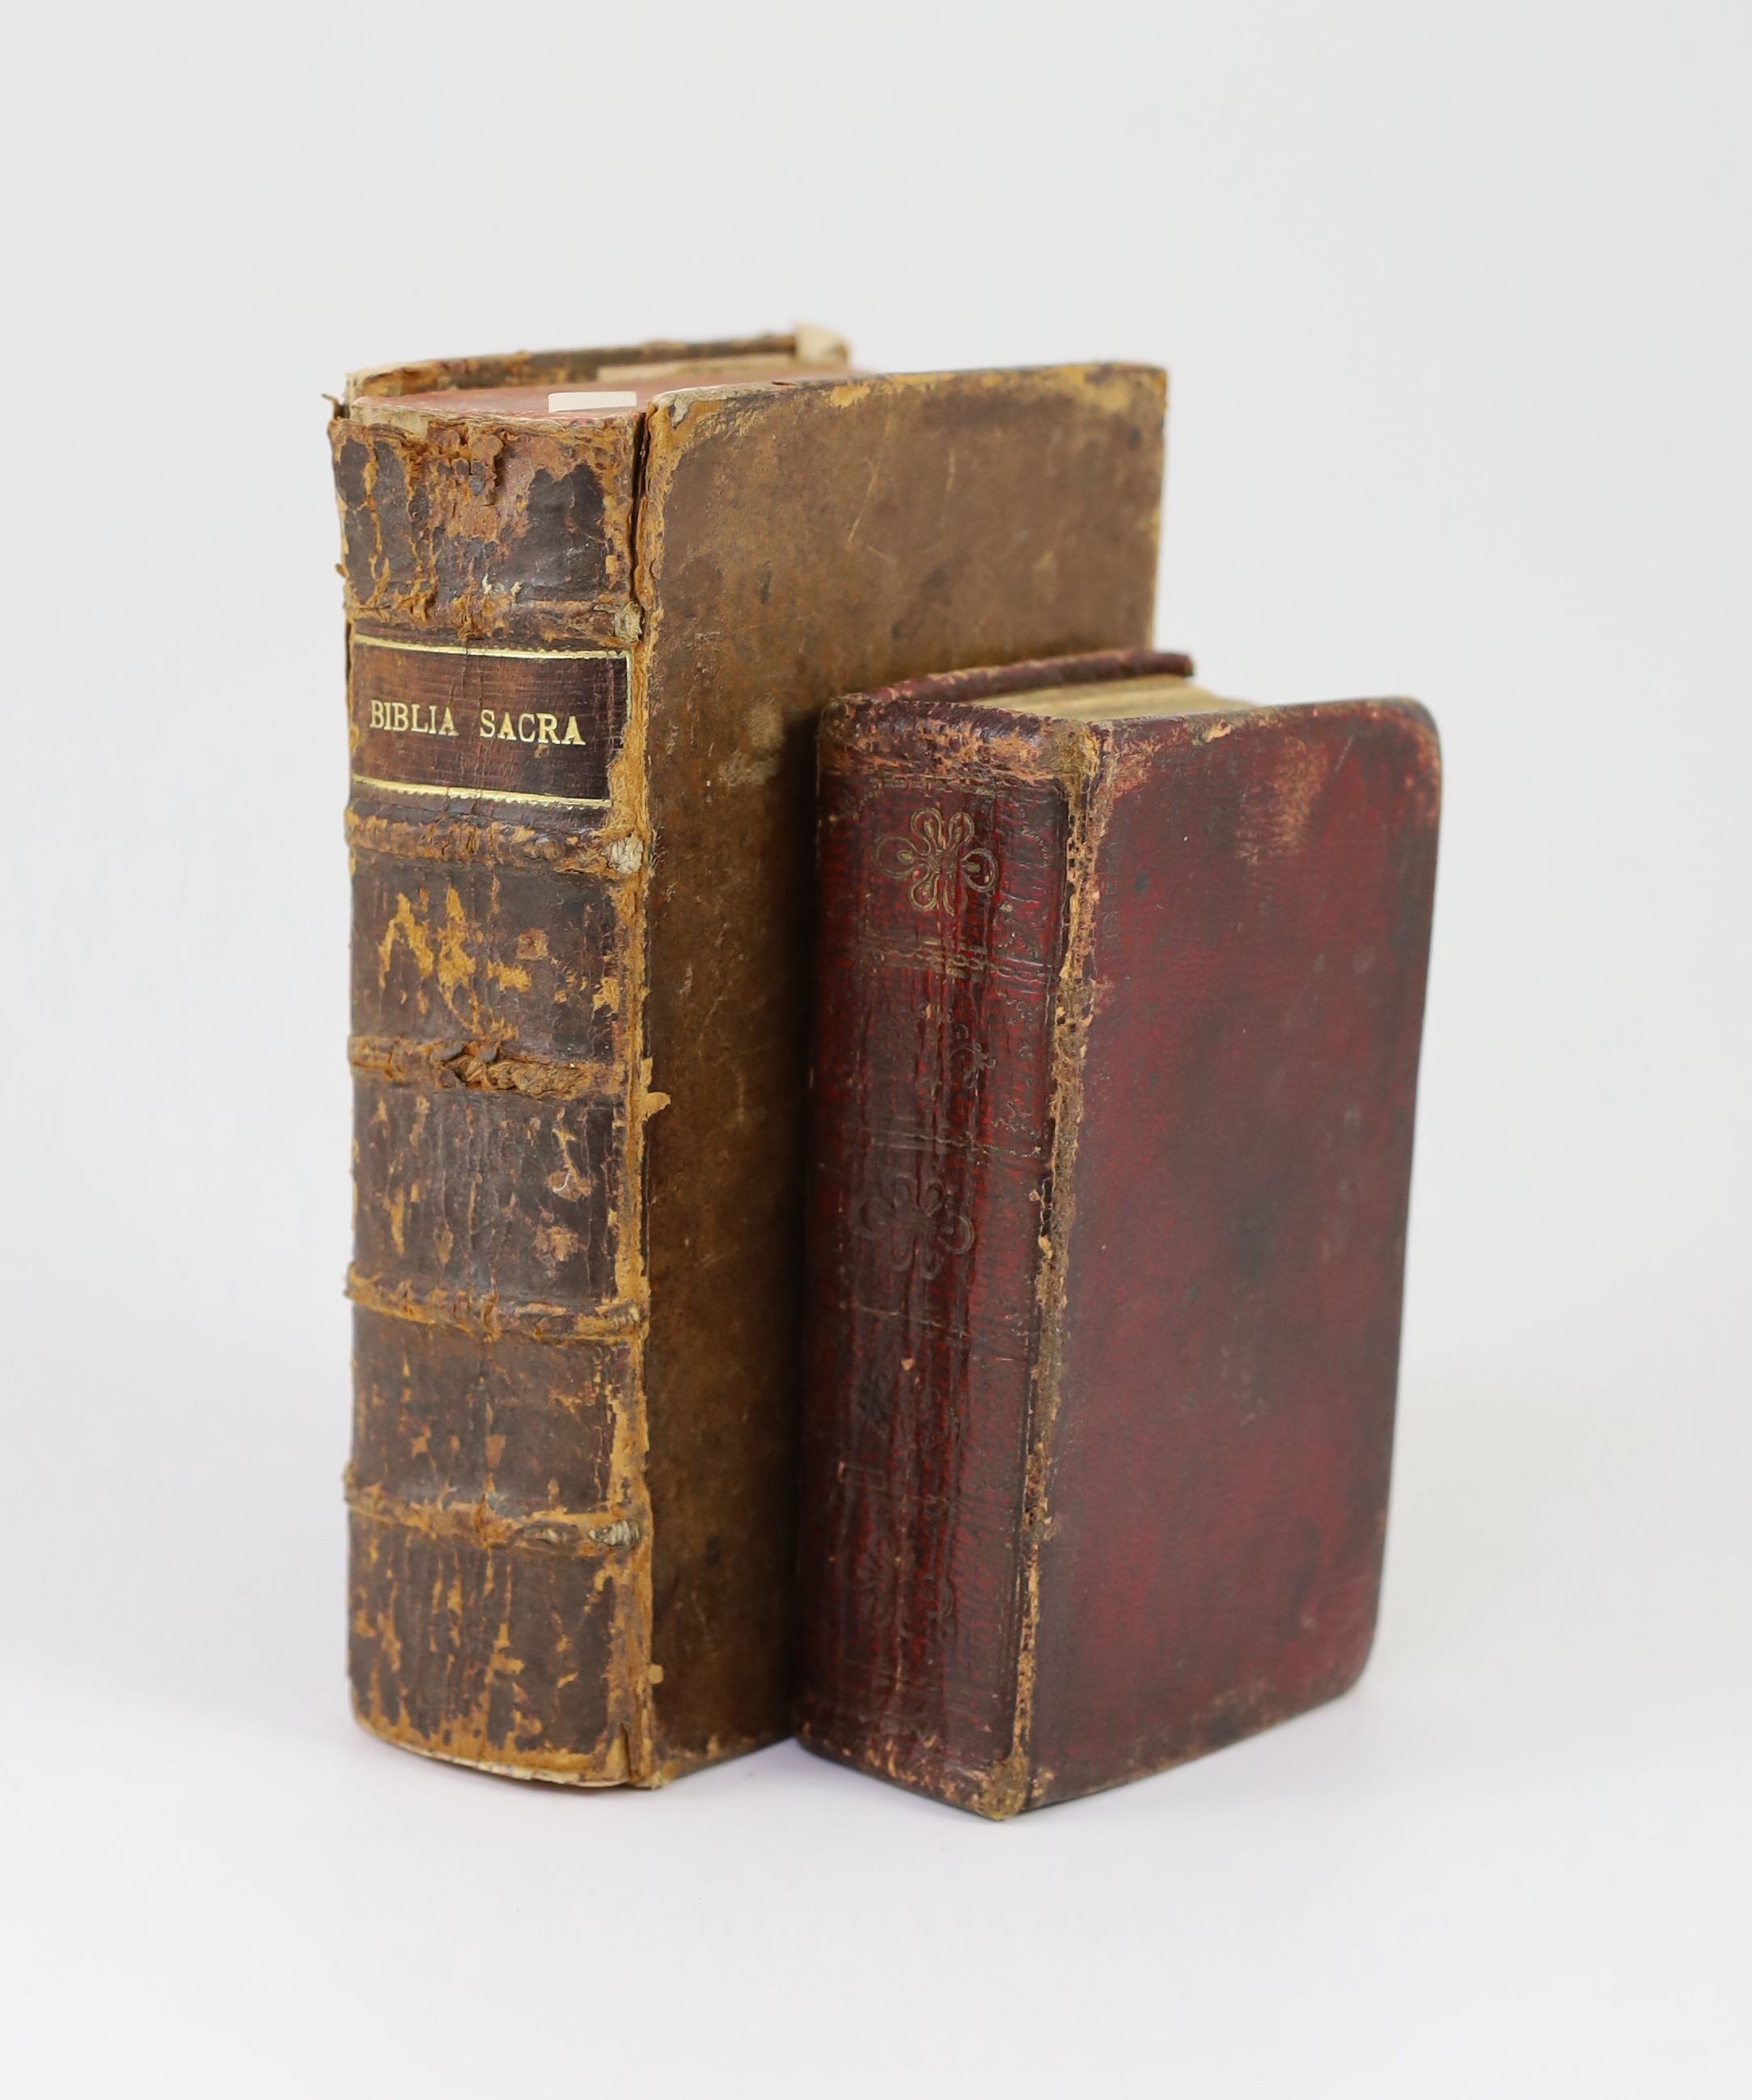 Bible in Latin - Biblia Sacra Vulgate Editioni, Sixti V.Pont. Max. Jussu…… 8vo, calf, weak joints, spine scuffed and relabelled, lacking pages 783-798, Petri Guillimin, Lyon, [c. 1693], with - Bible in English - The Holy